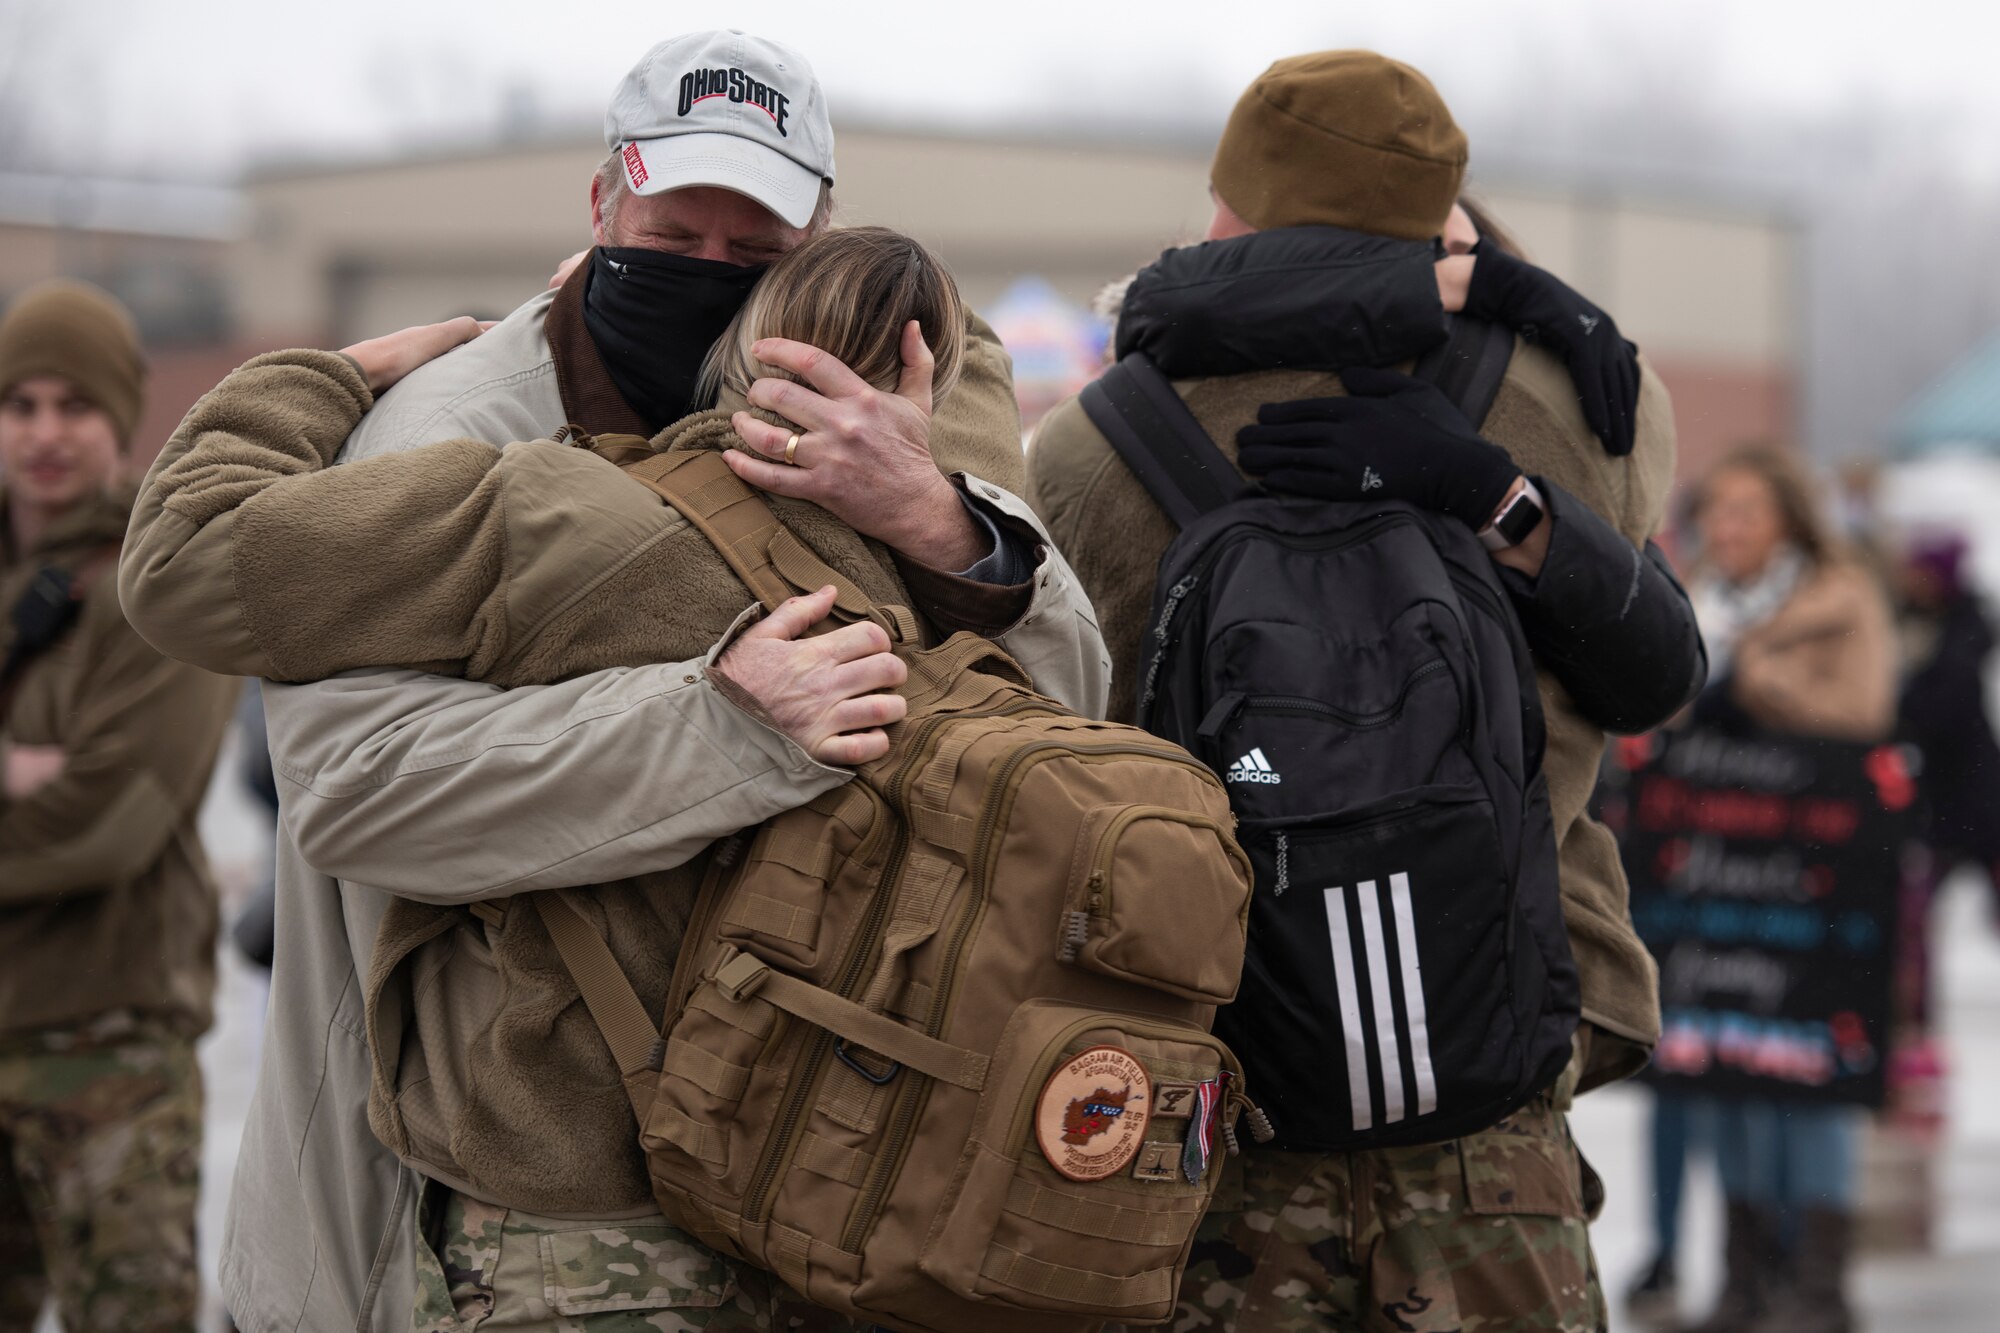 Staff Sgt. Courtney Iannucci, an intelligence specialist, and Staff Sgt. Alex Iannucci, a crew chief, assigned to the Ohio National Guard’s 180th Fighter Wing, embrace loved ones after returning home from their overseas deployment, Jan. 26, 2020 at the 180FW in Swanton, Ohio.